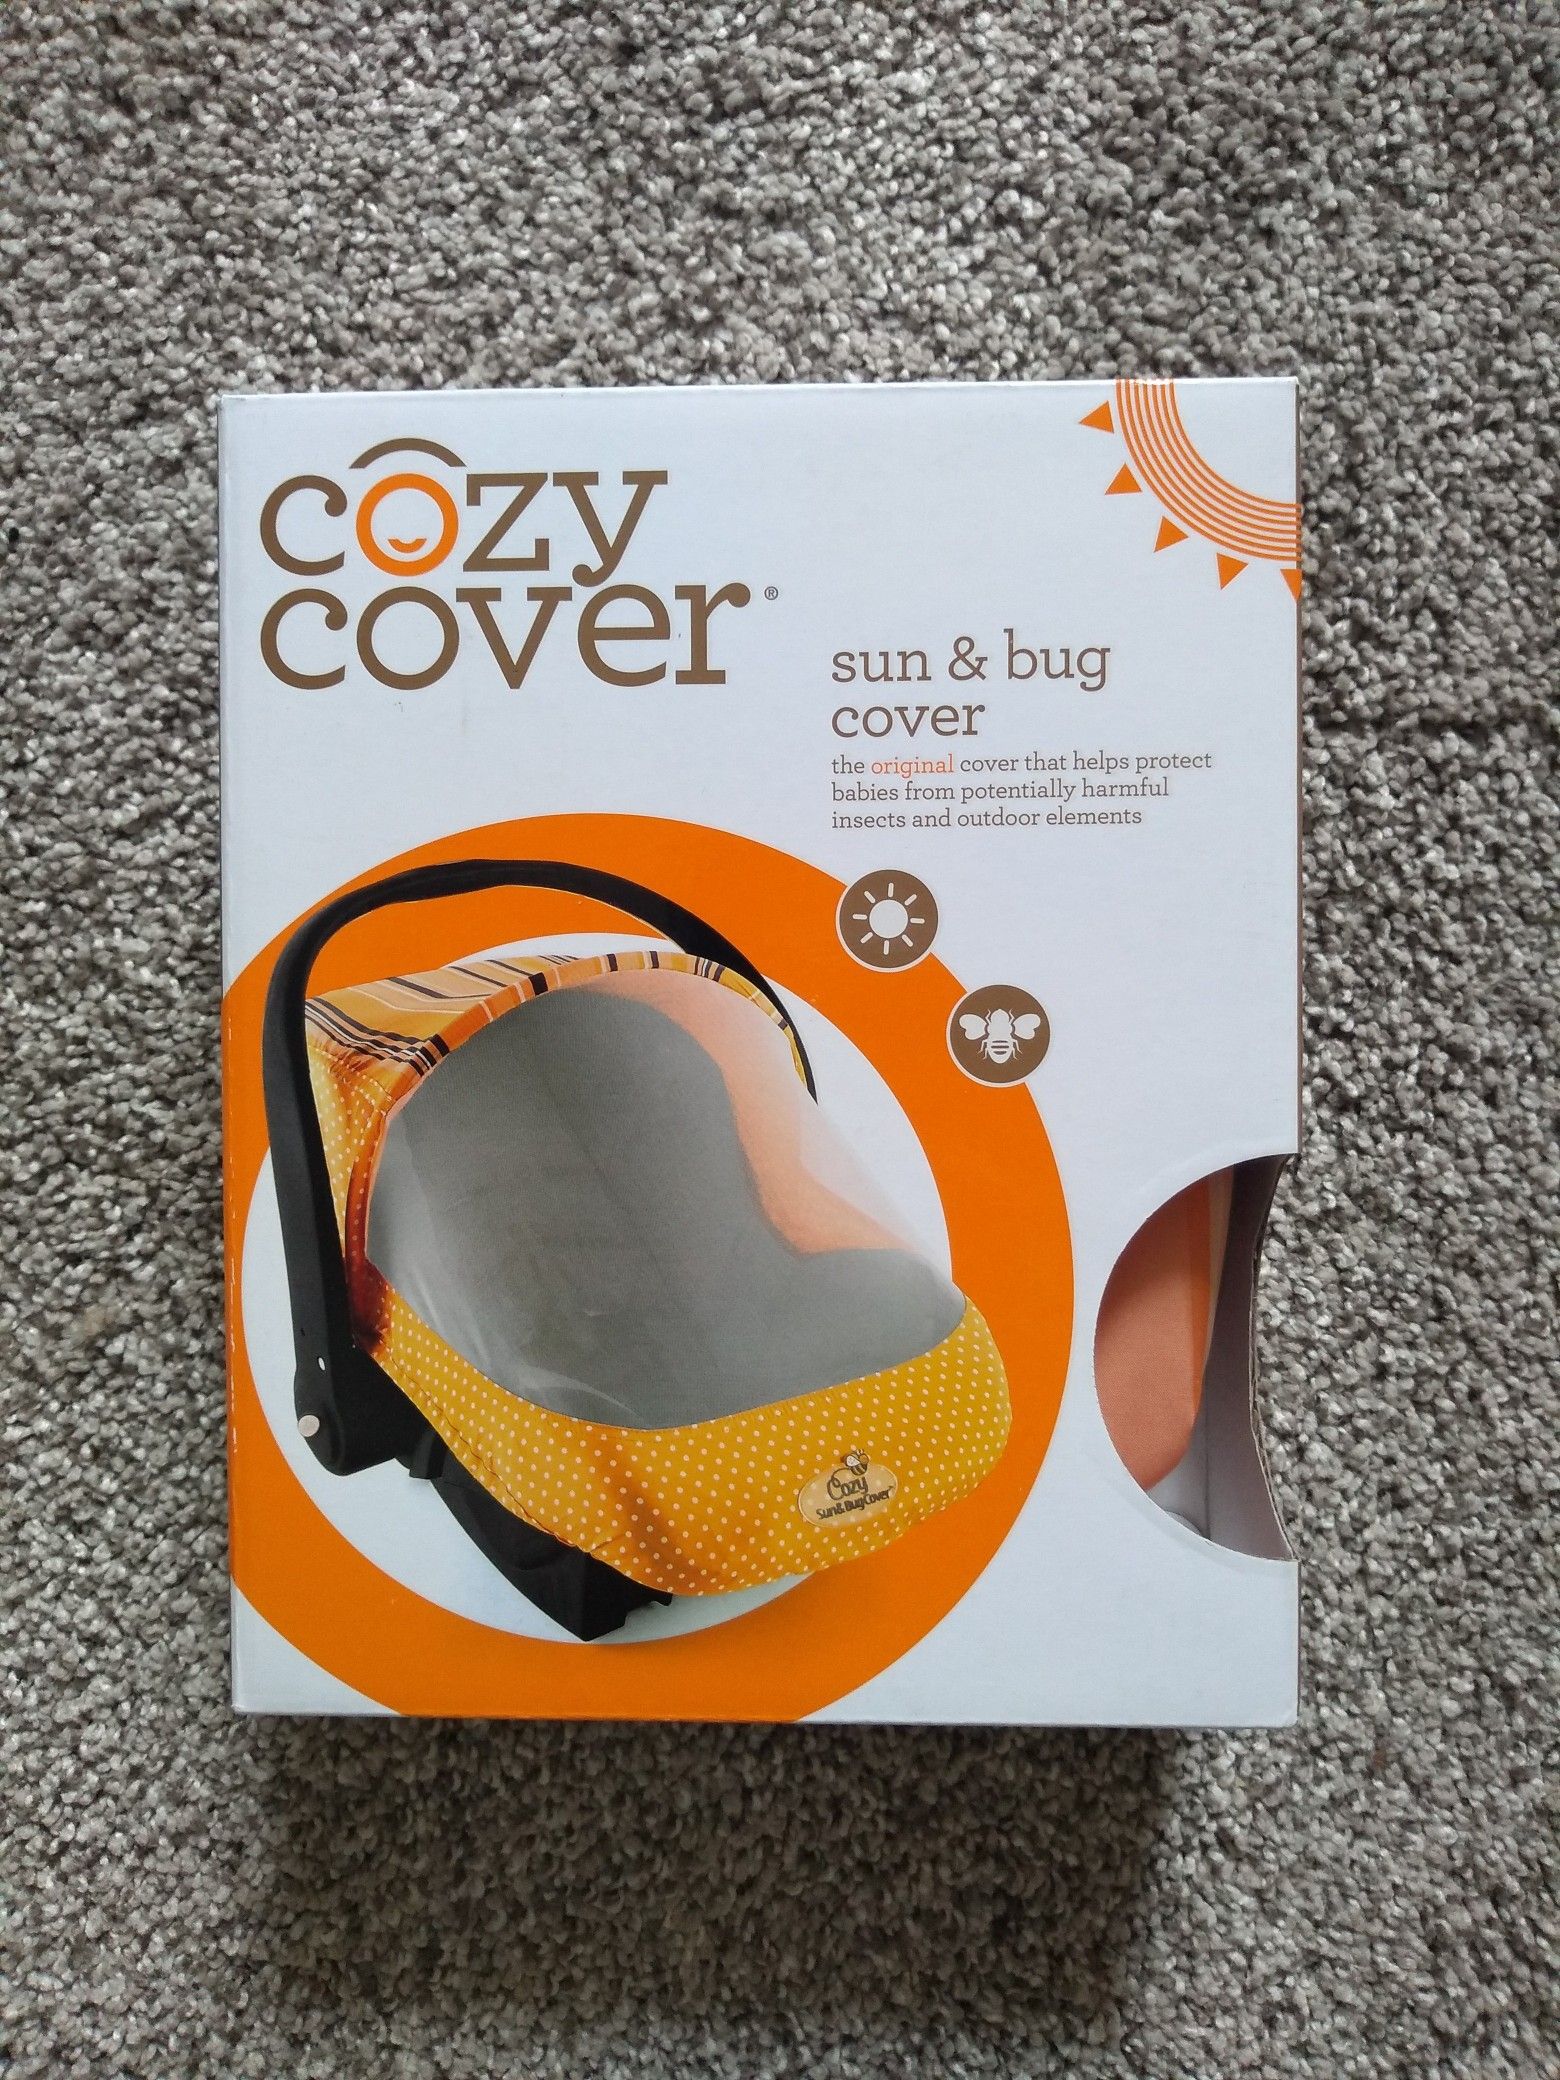 COZY COVER SUN & BUG COVER FOR BABY CAR SEAT * NEW!